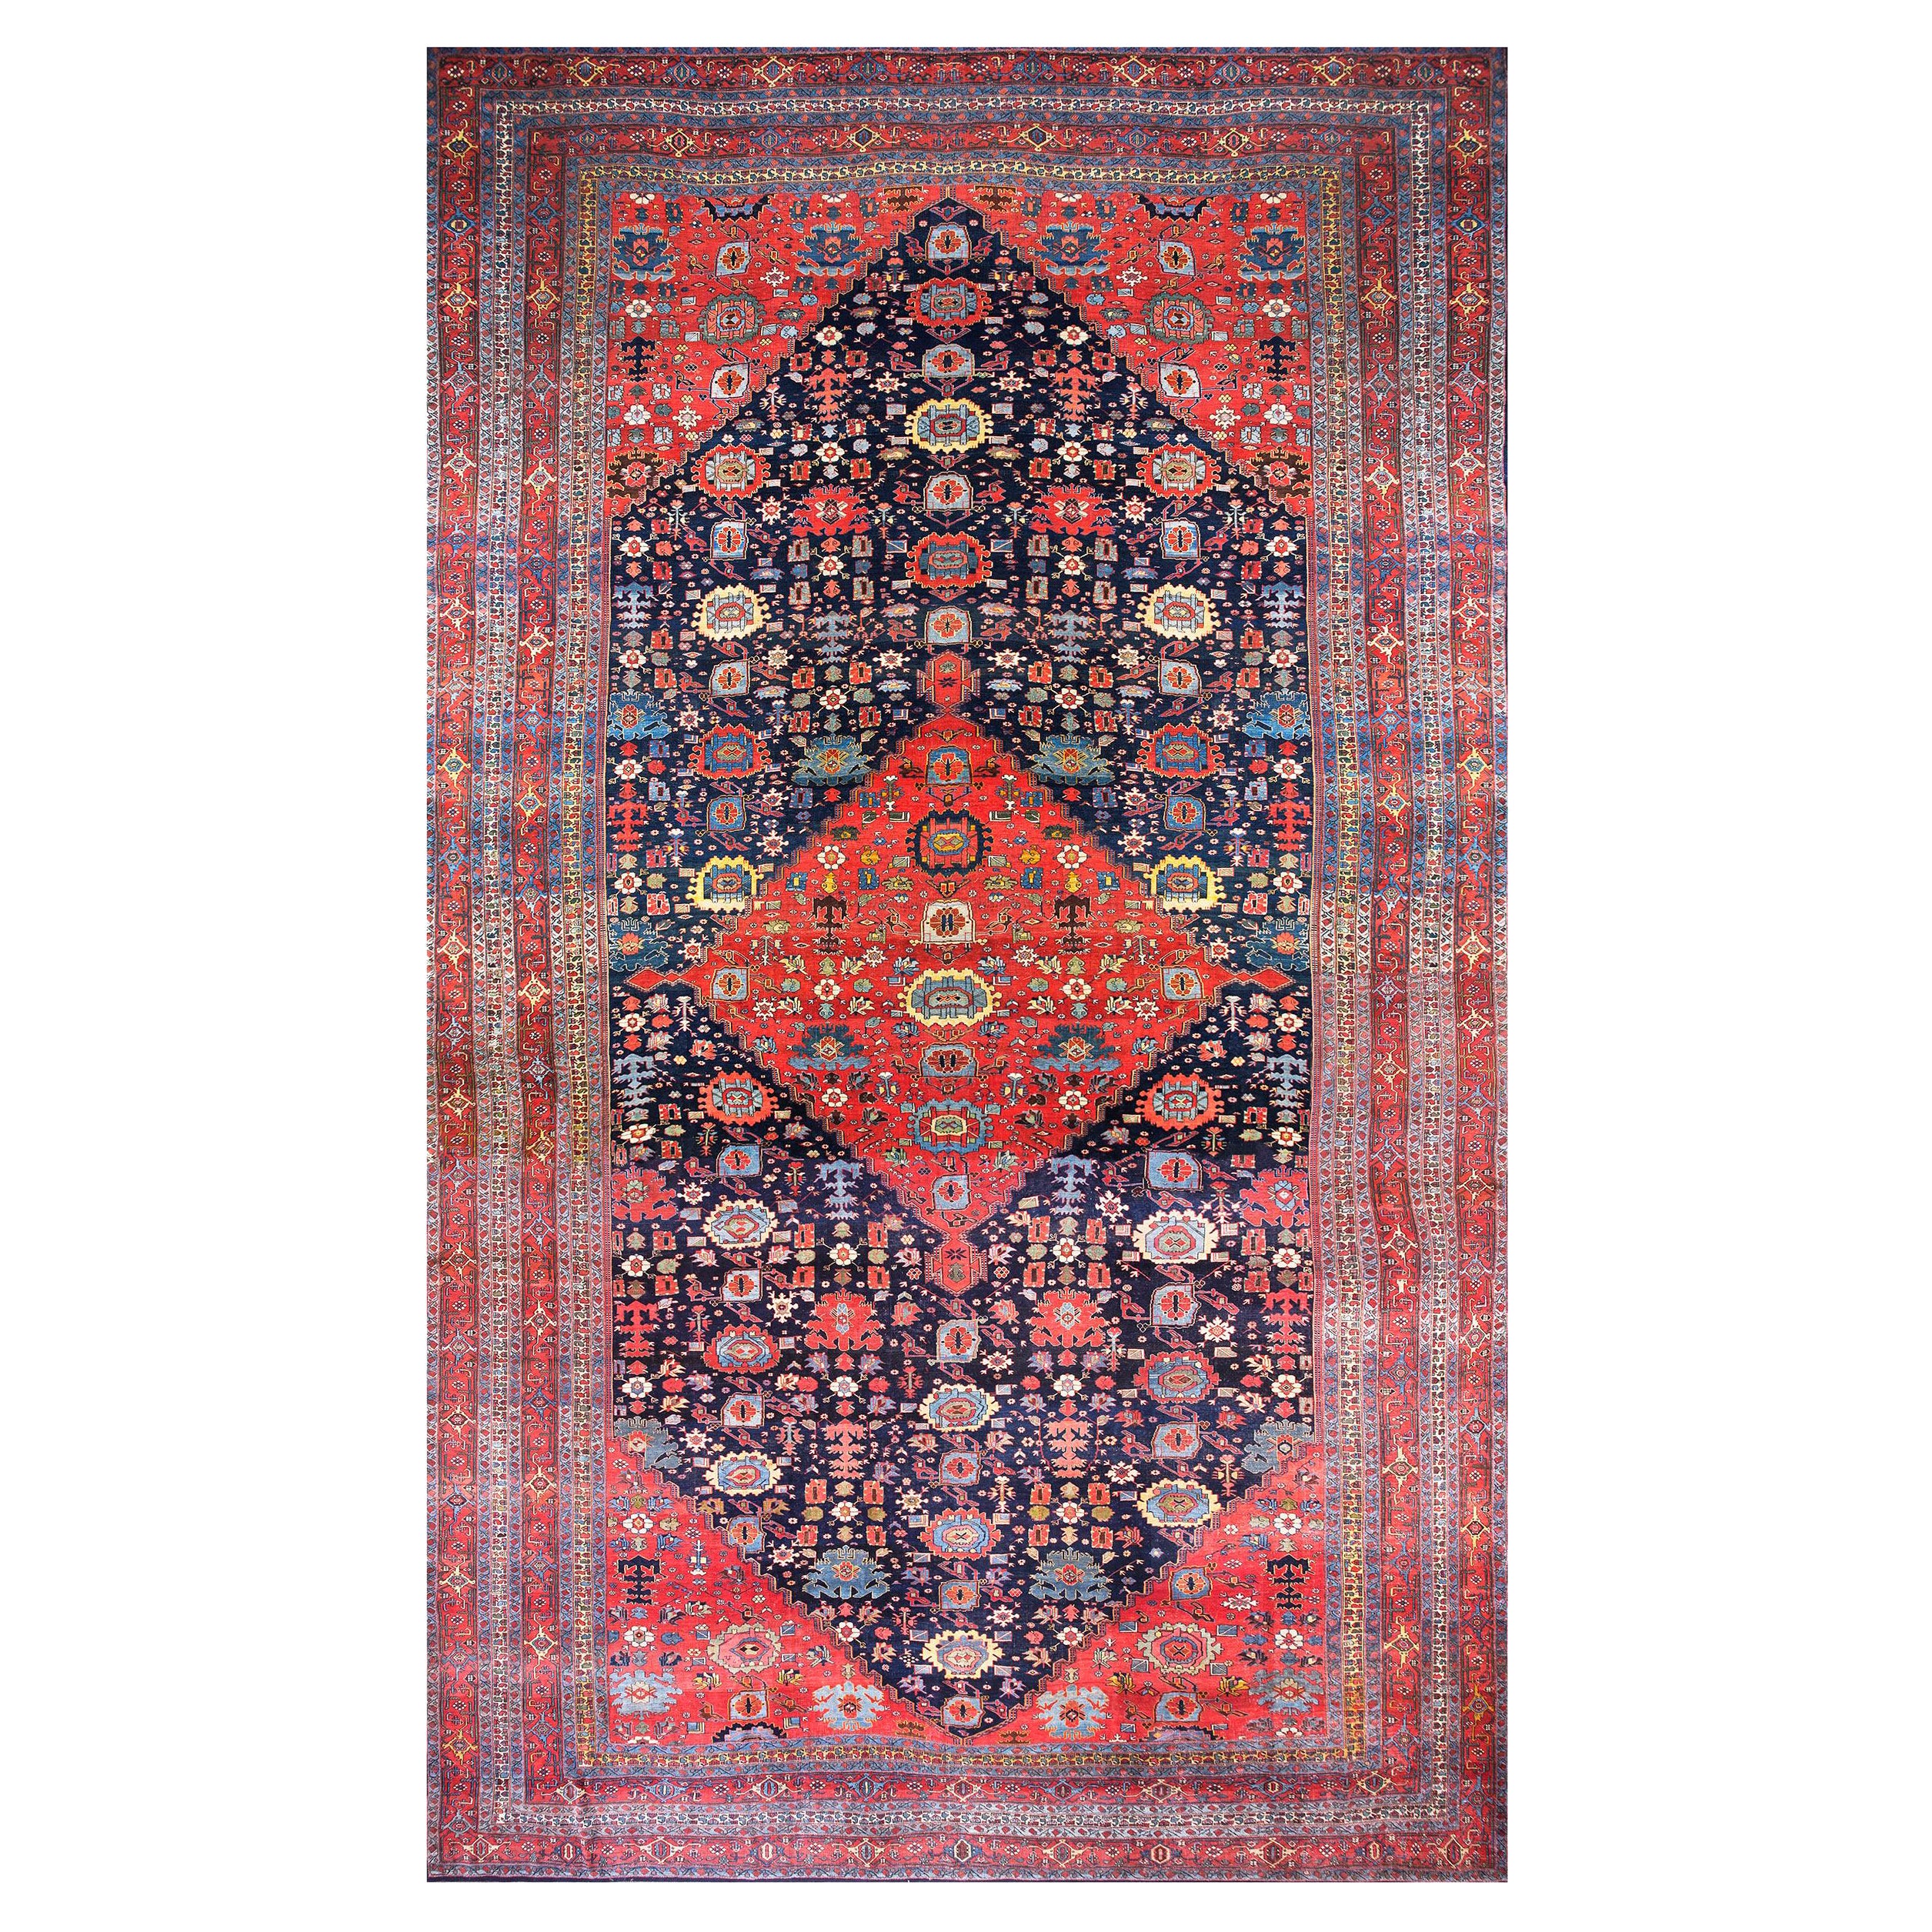 19th Century W. Persian Bijar Carpet with Harshang Pattern For Sale